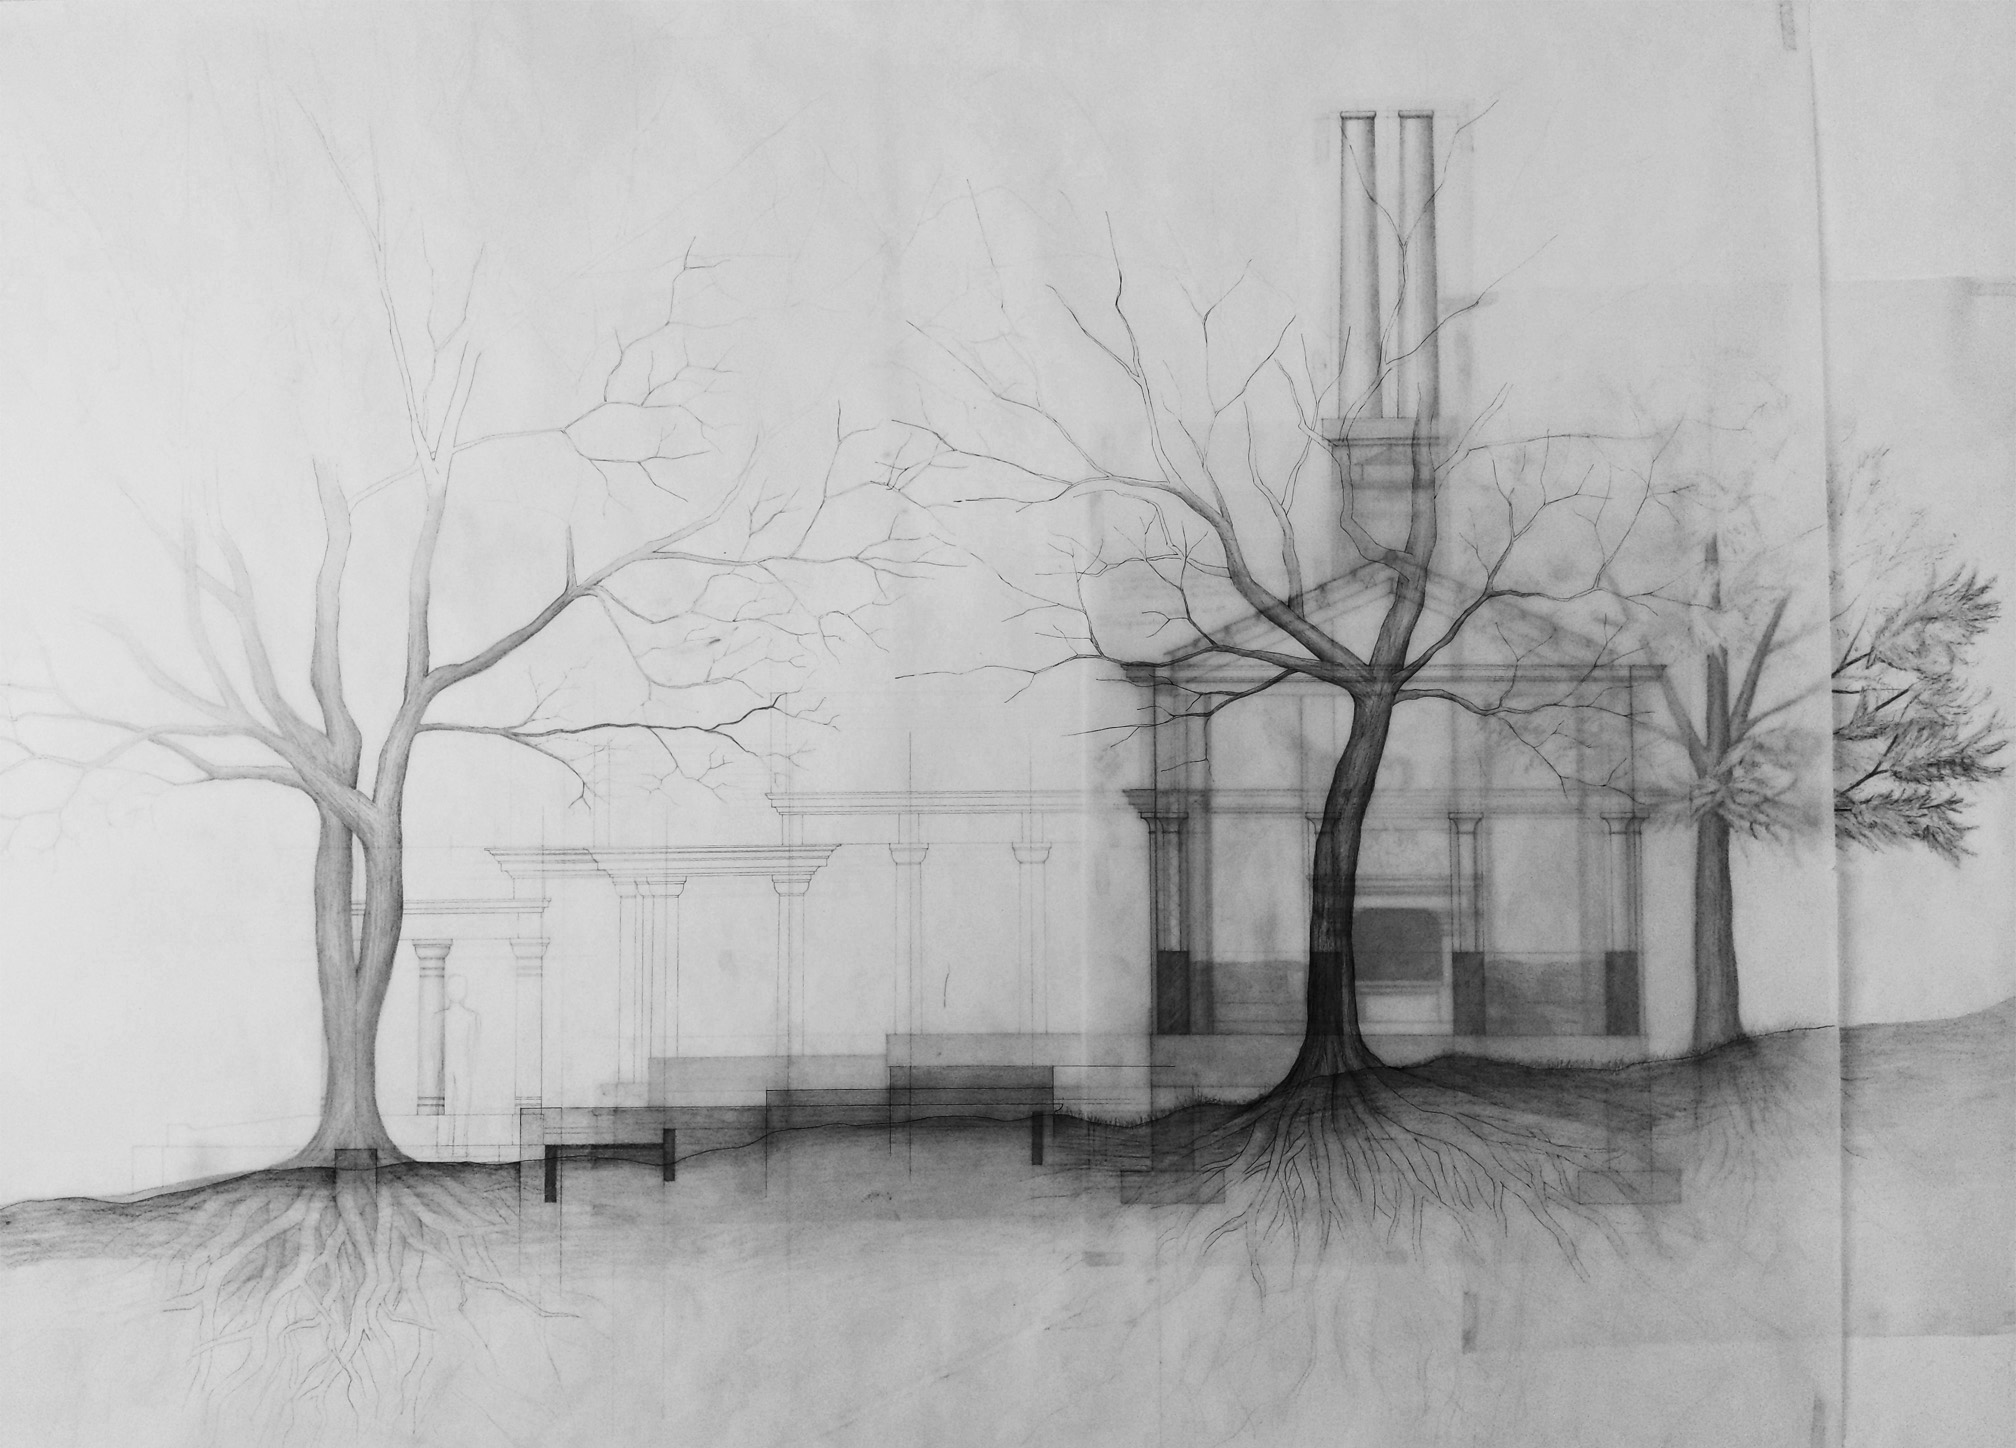 Section drawing, scale 1:20, pencil and pen on tracing paper and paper